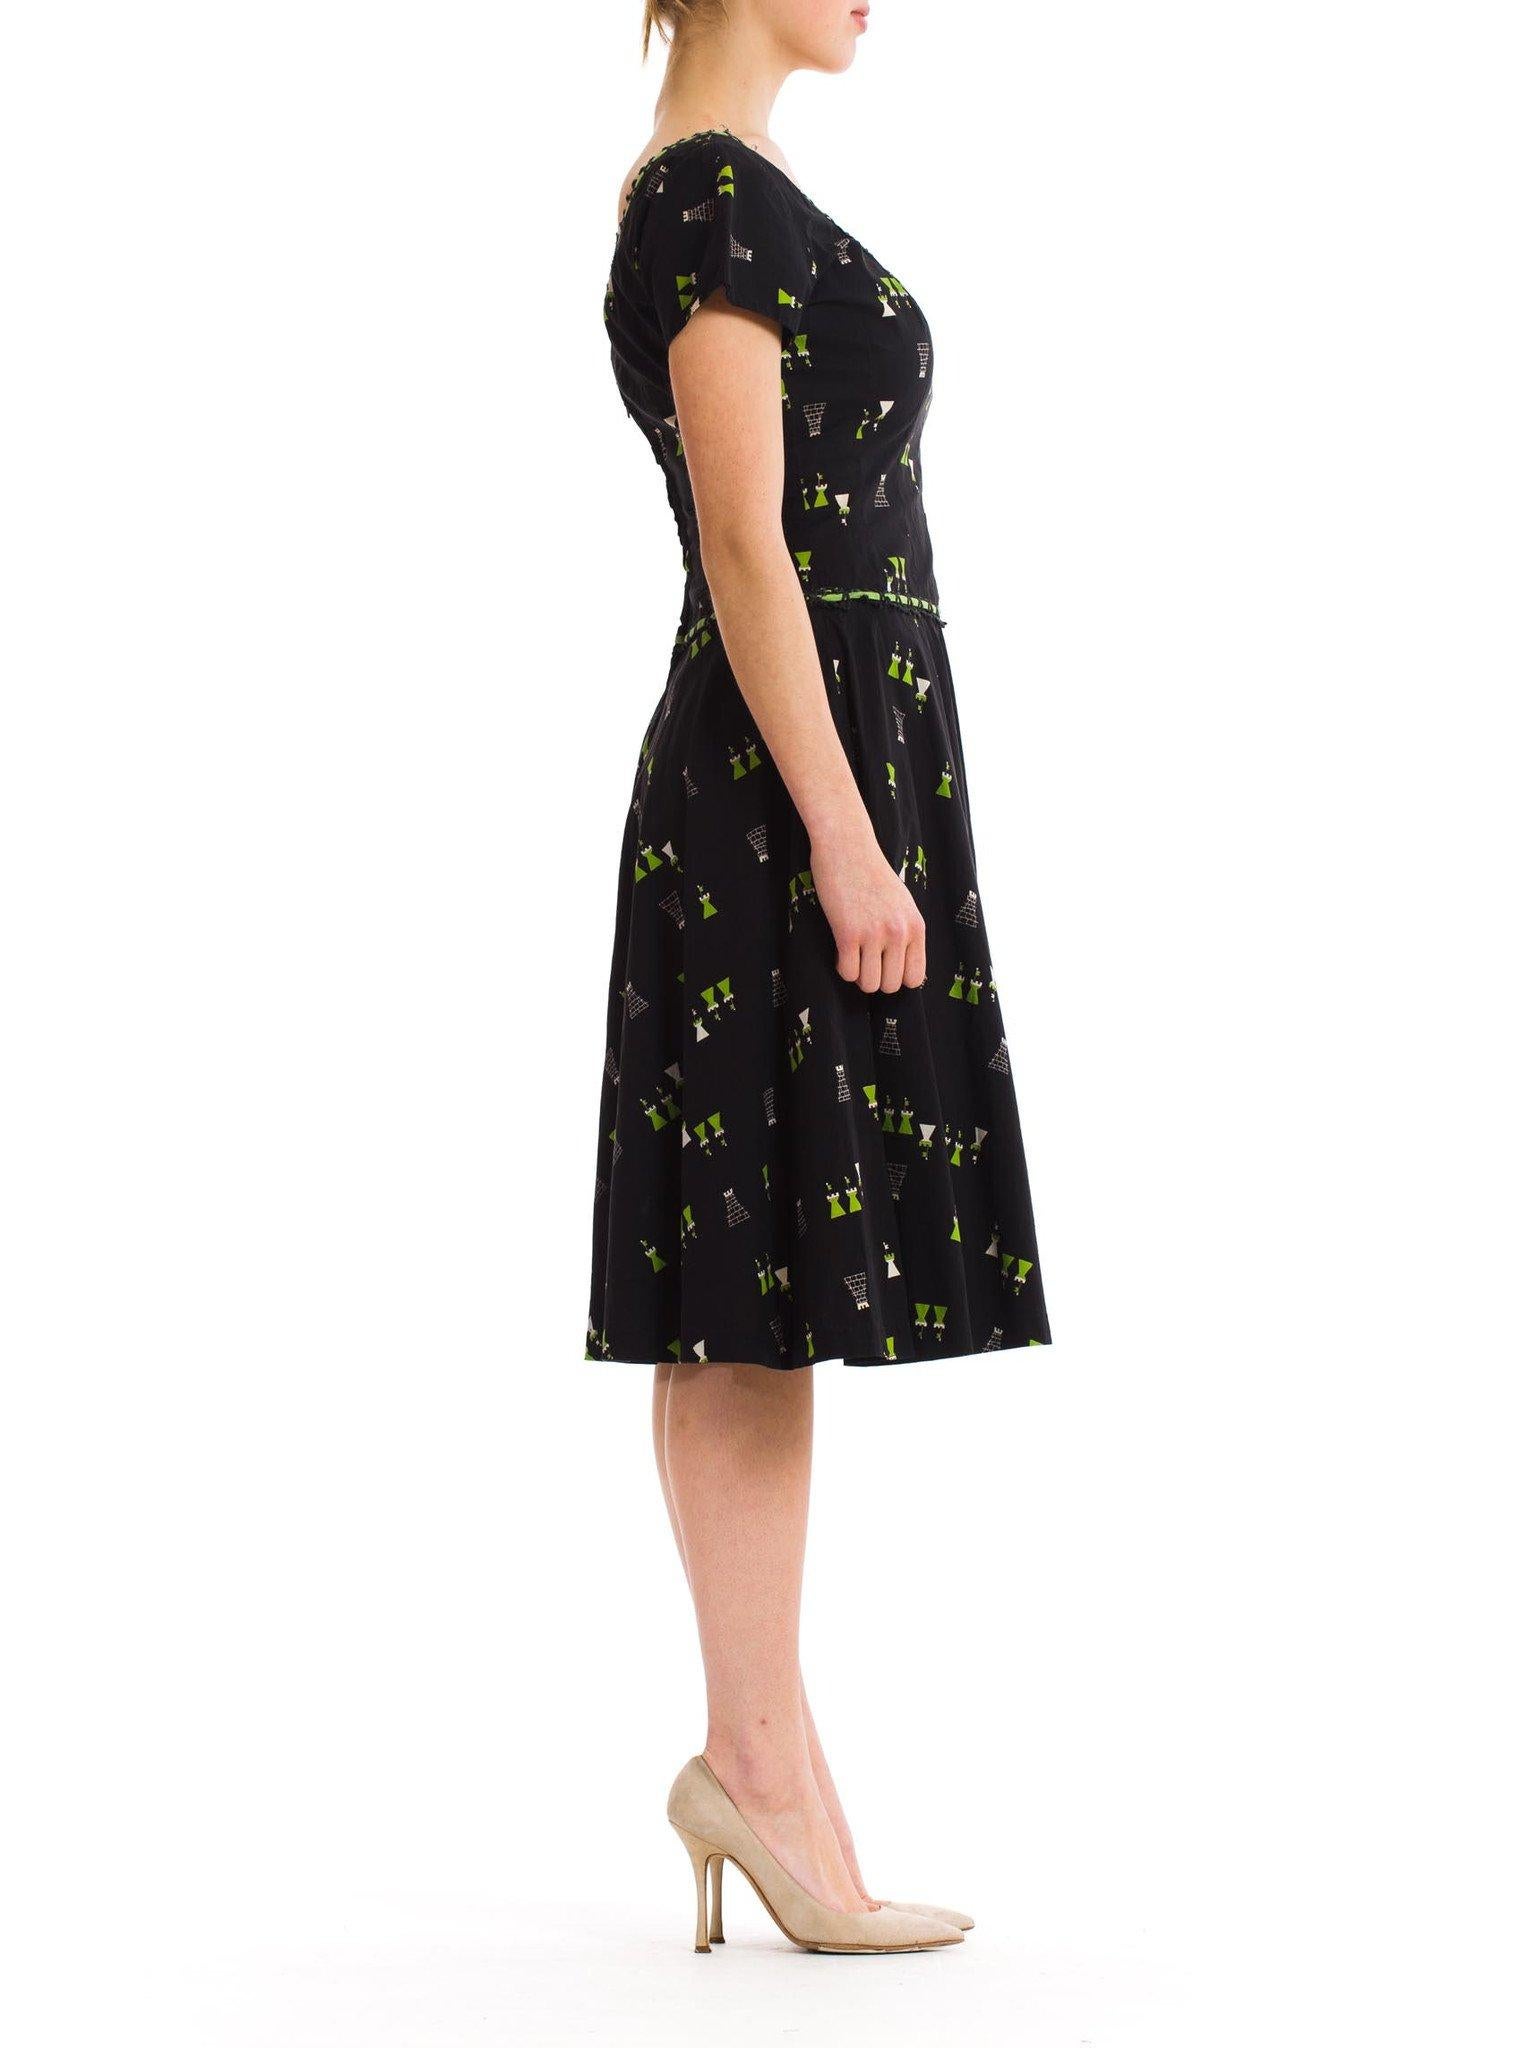 1950S Black Cotton Day Dress Printed With Cute Green Castles For Sale 2